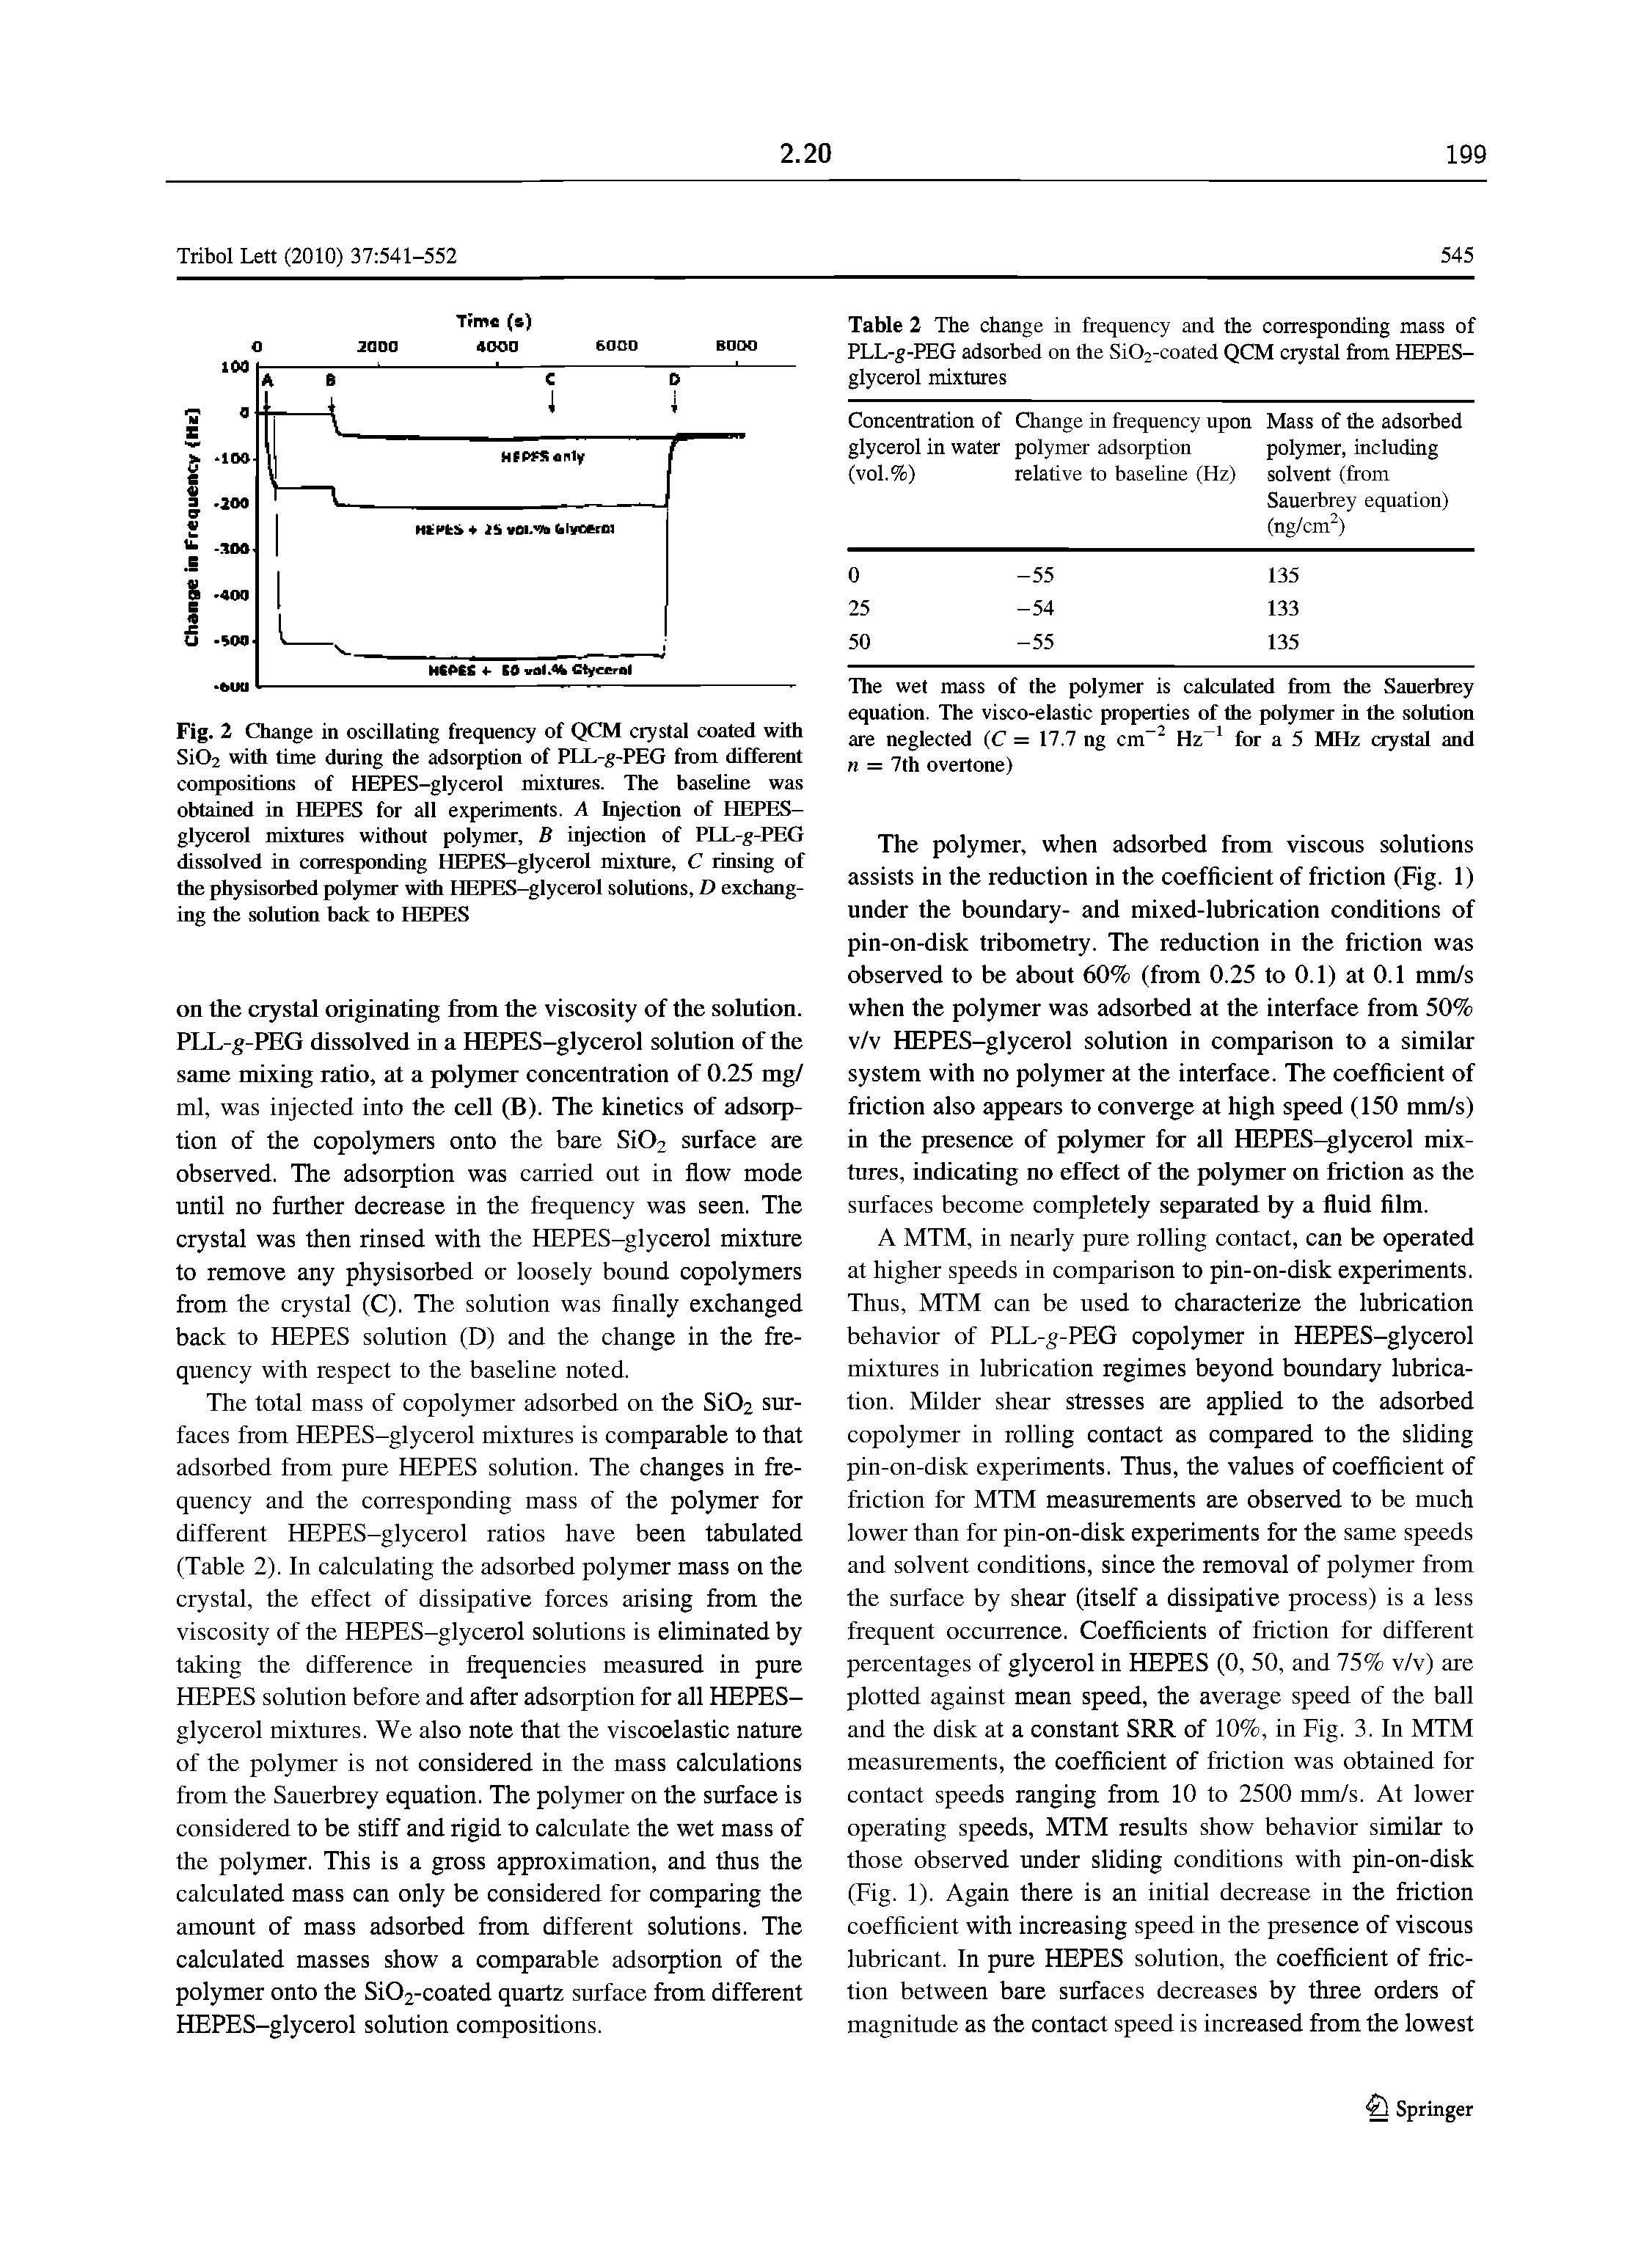 Fig. 2 Change in oscillating freqnency of QCM crystal coated with Si02 with tune during the adsorption of PLL-g-PEG from different compositions of HEPES-glycerol mixtures. The haseline was obtained in HEPES for all experiments. A Injection of HEPES-glycerol mixtures without polymer, B injection of PLL-g-PEG dissolved in corresponding HEPES-glycerol mixture, C rinsing of the physisorbed polymer with HEPES-glycerol solutions, D exchanging the solution back to HEPES...